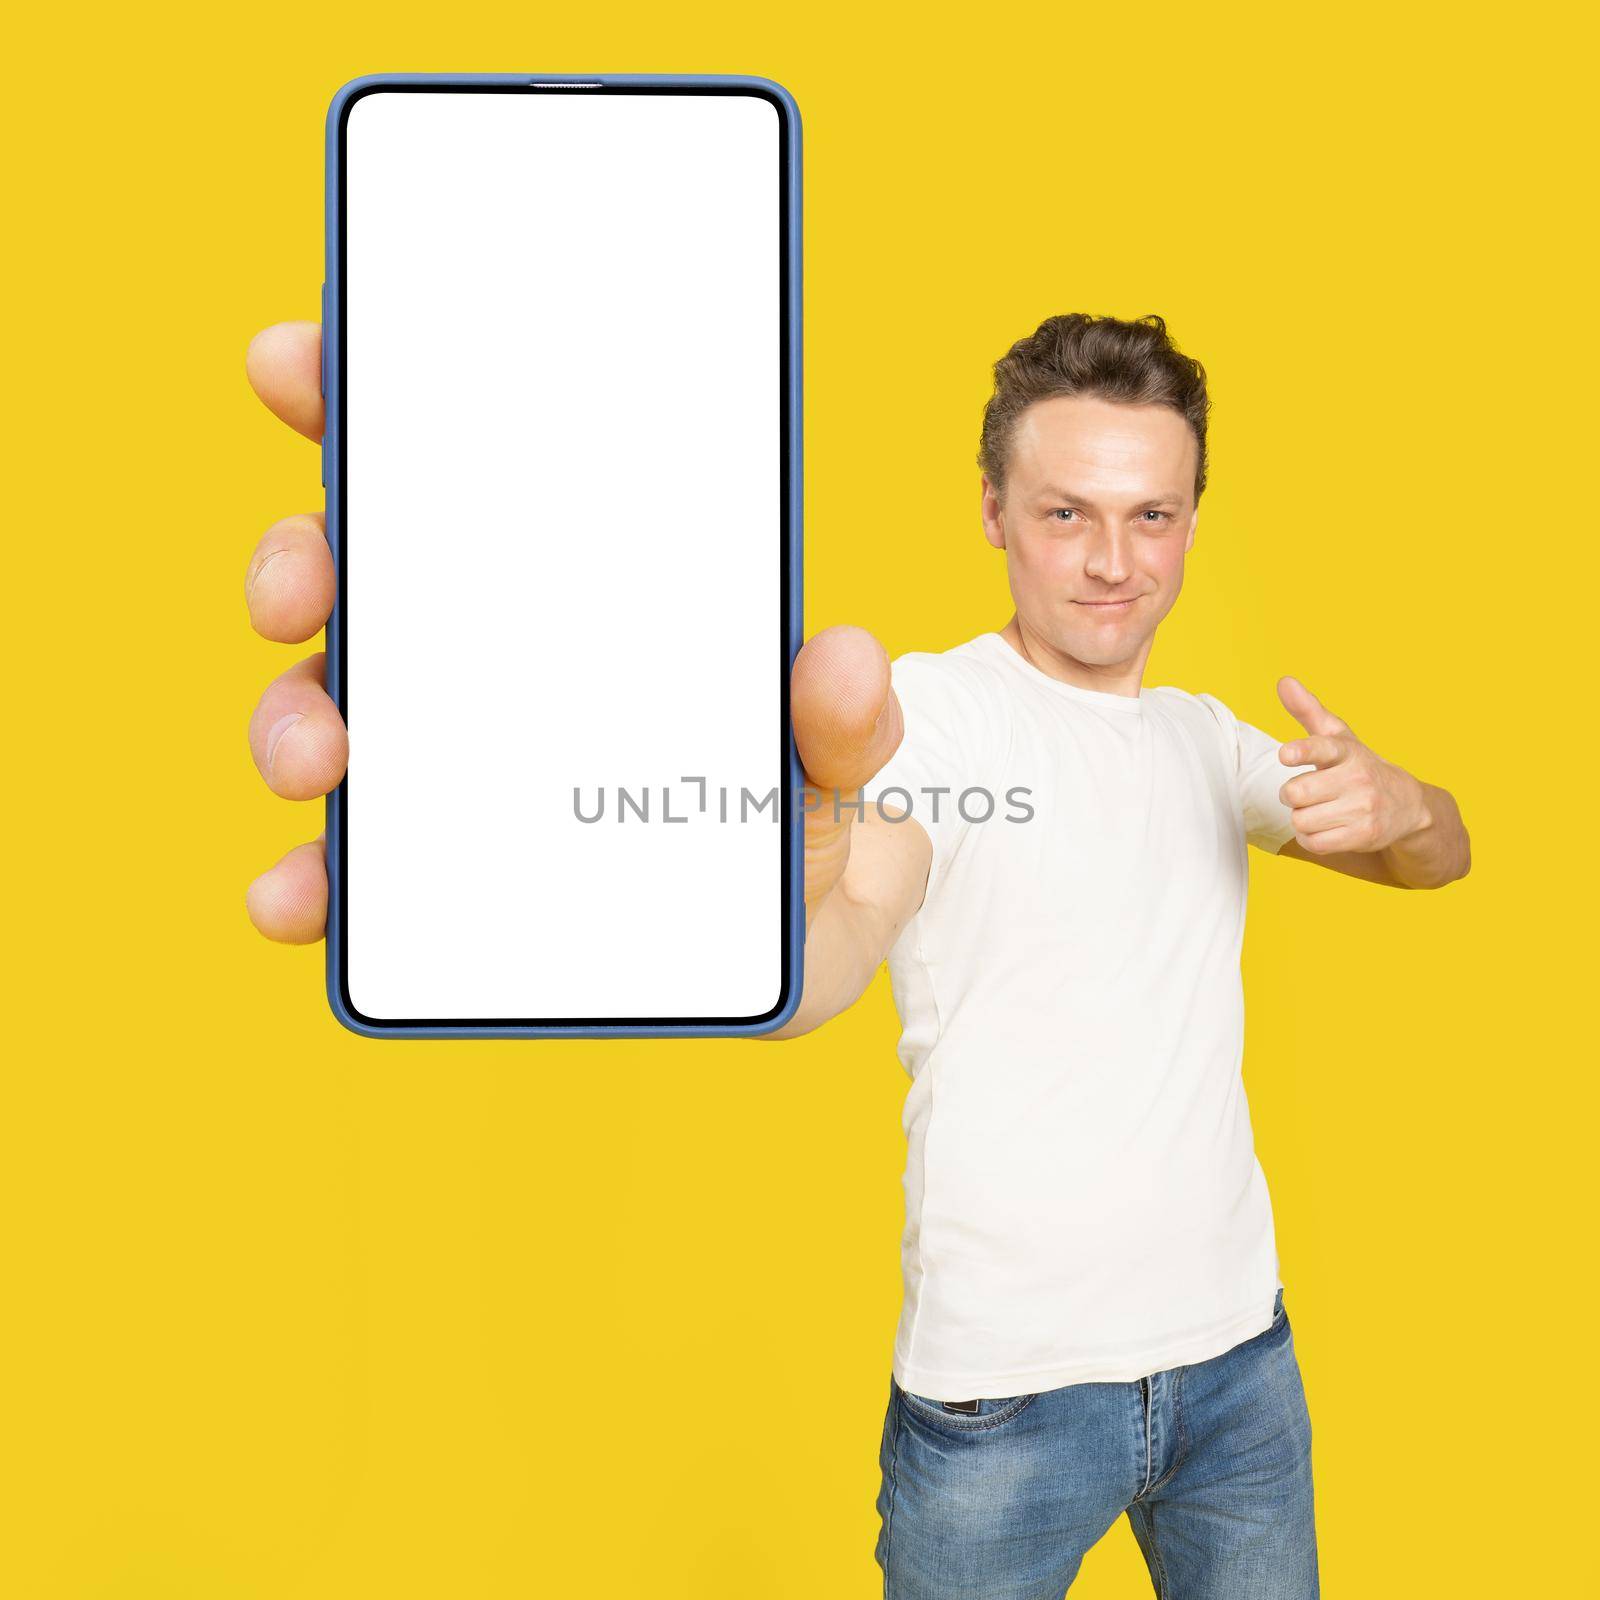 Handsome man holding huge smartphone with white screen pointing at white empty screen, wearing white t-shirt and jeans isolated on yellow background. Mobile app advertisement, great offer by LipikStockMedia